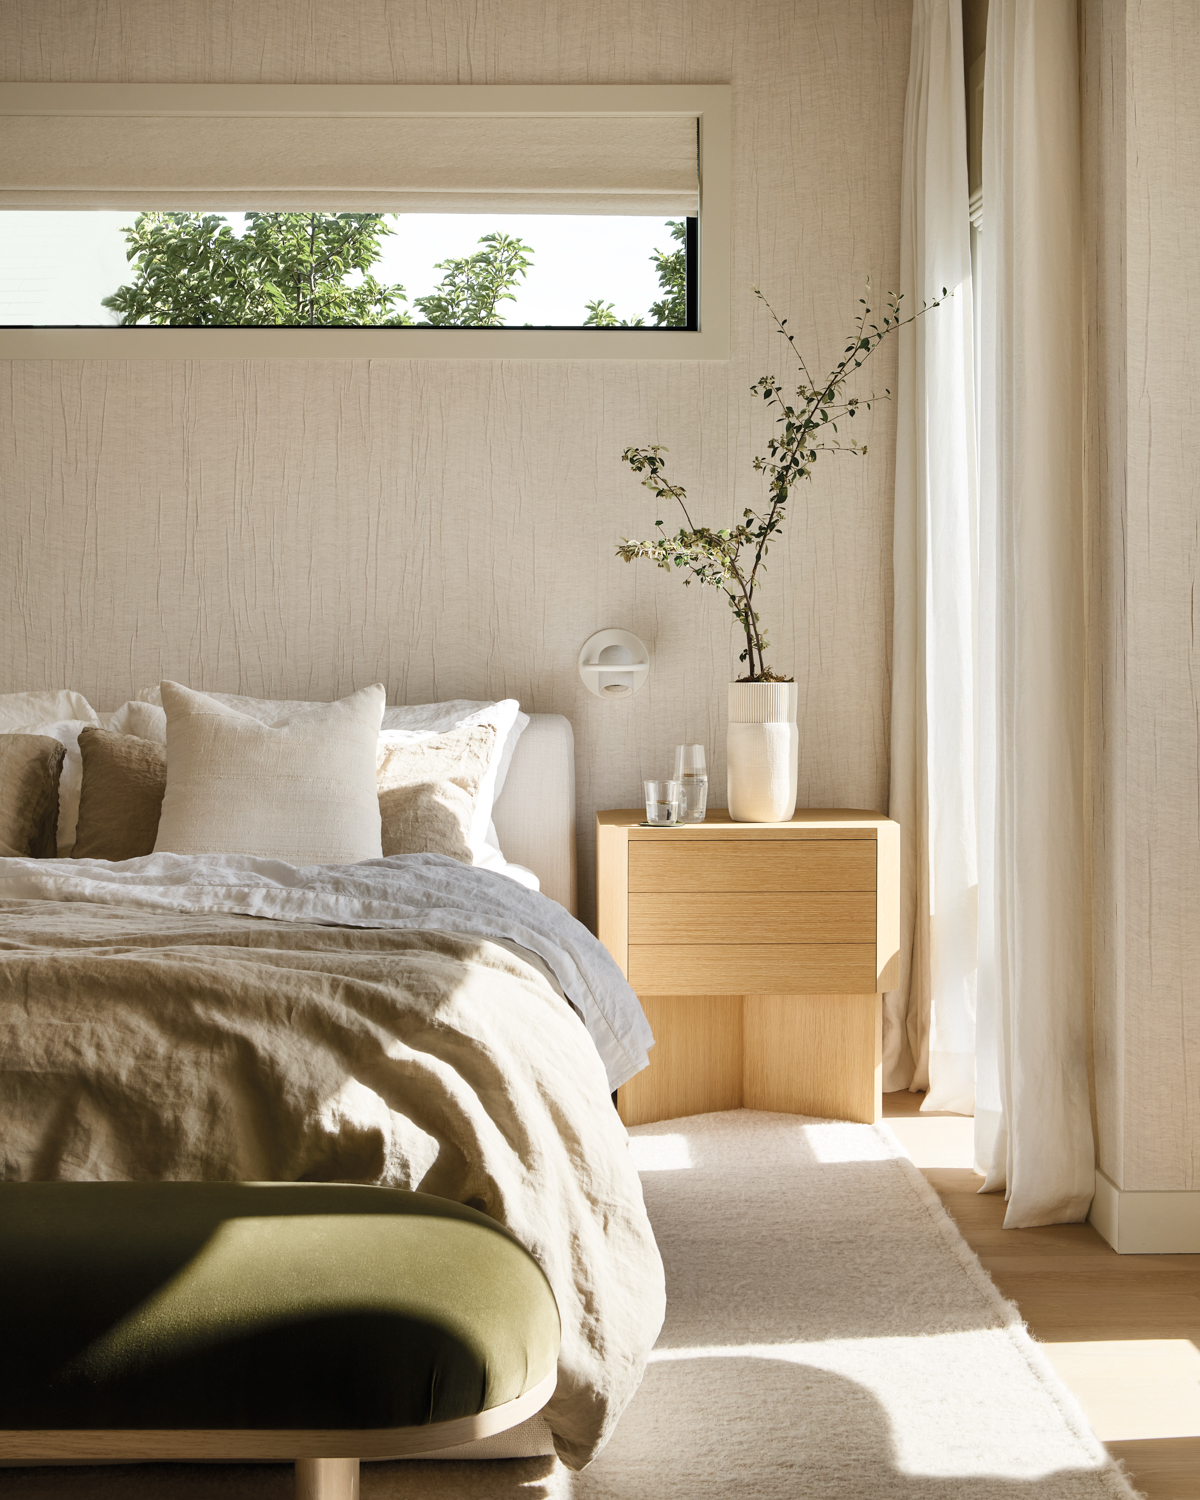 Bedroom in shades of ivory...